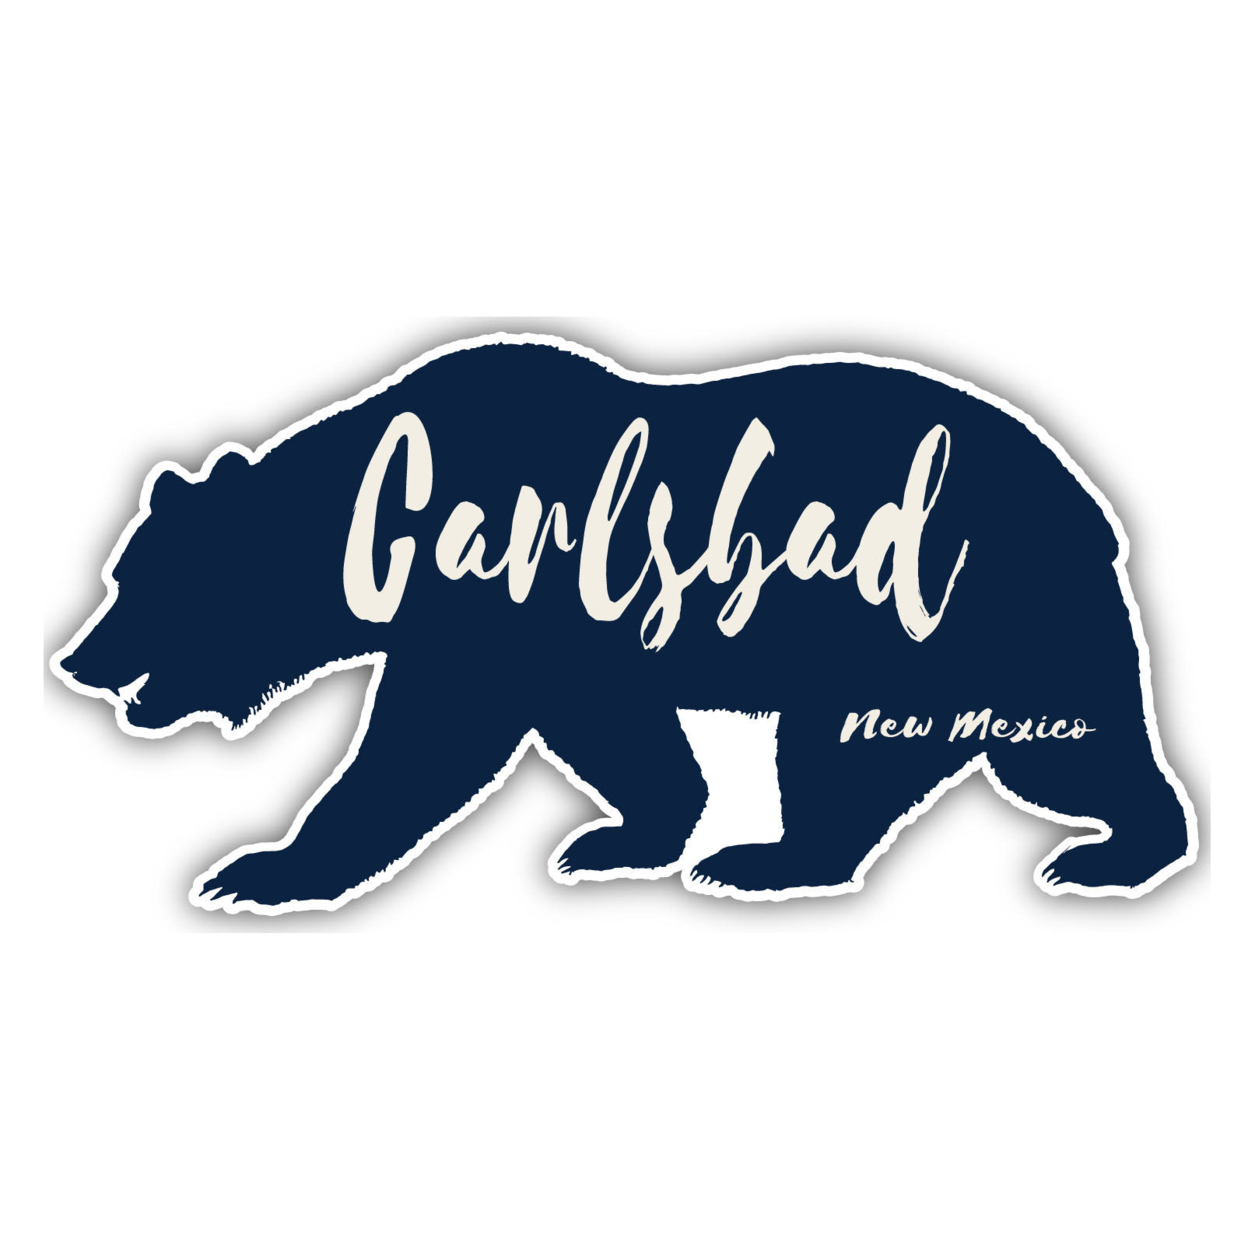 Carlsbad New Mexico Souvenir Decorative Stickers (Choose Theme And Size) - Single Unit, 2-Inch, Great Outdoors